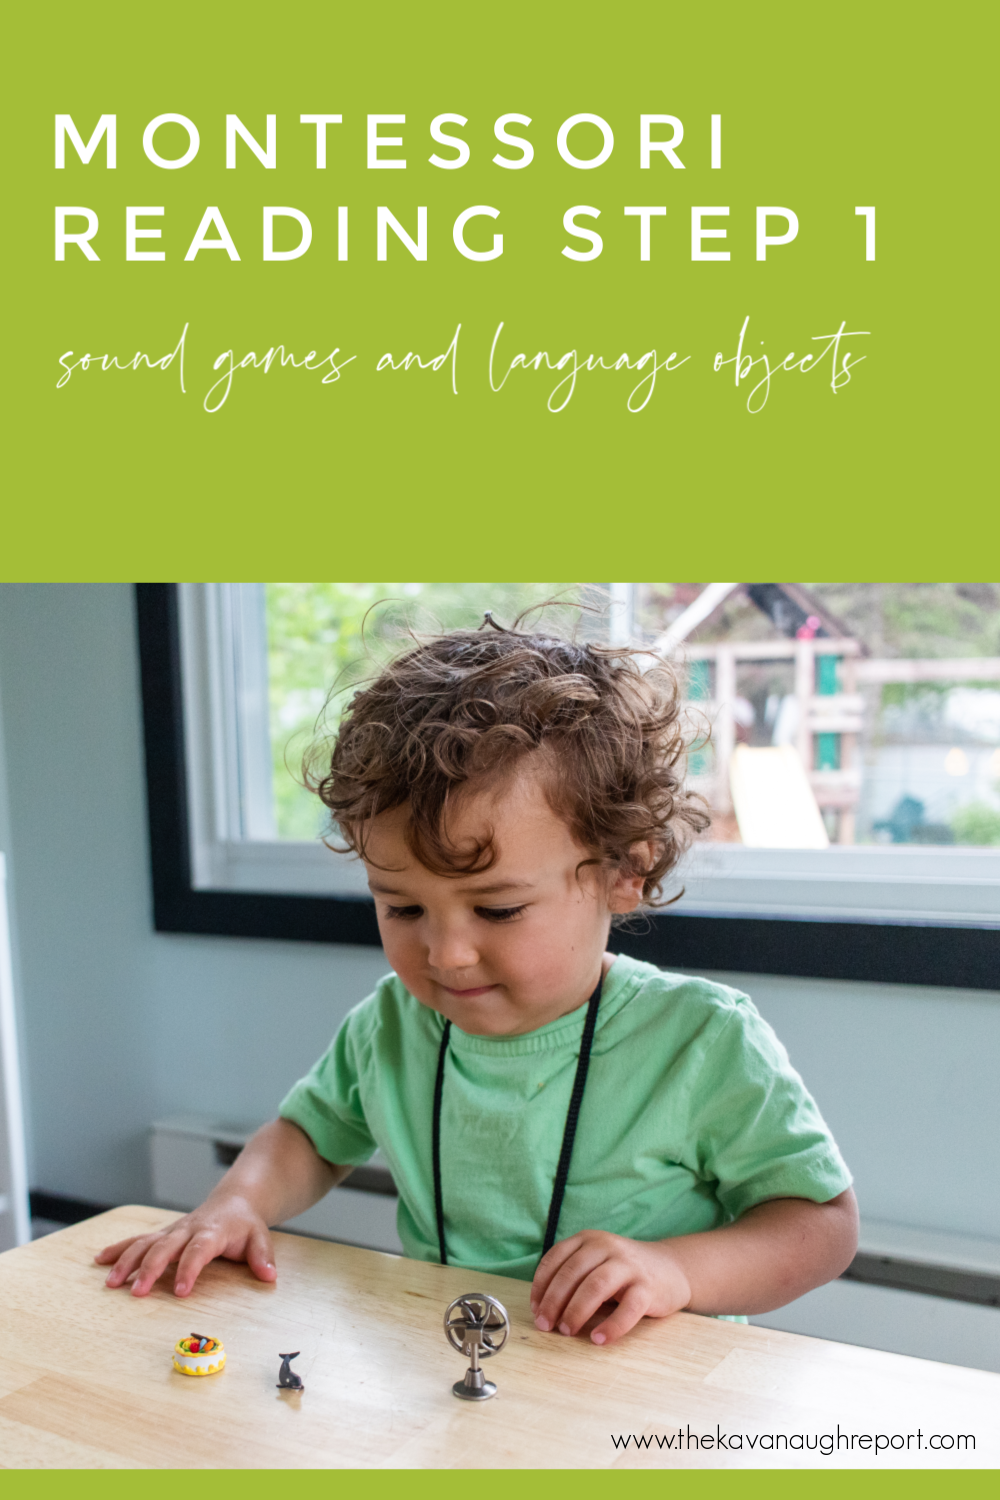 Sound games and language objects are fun Montessori activities that help your child learn to read and write using Montessori. They are easy and fun games that anyone can learn.